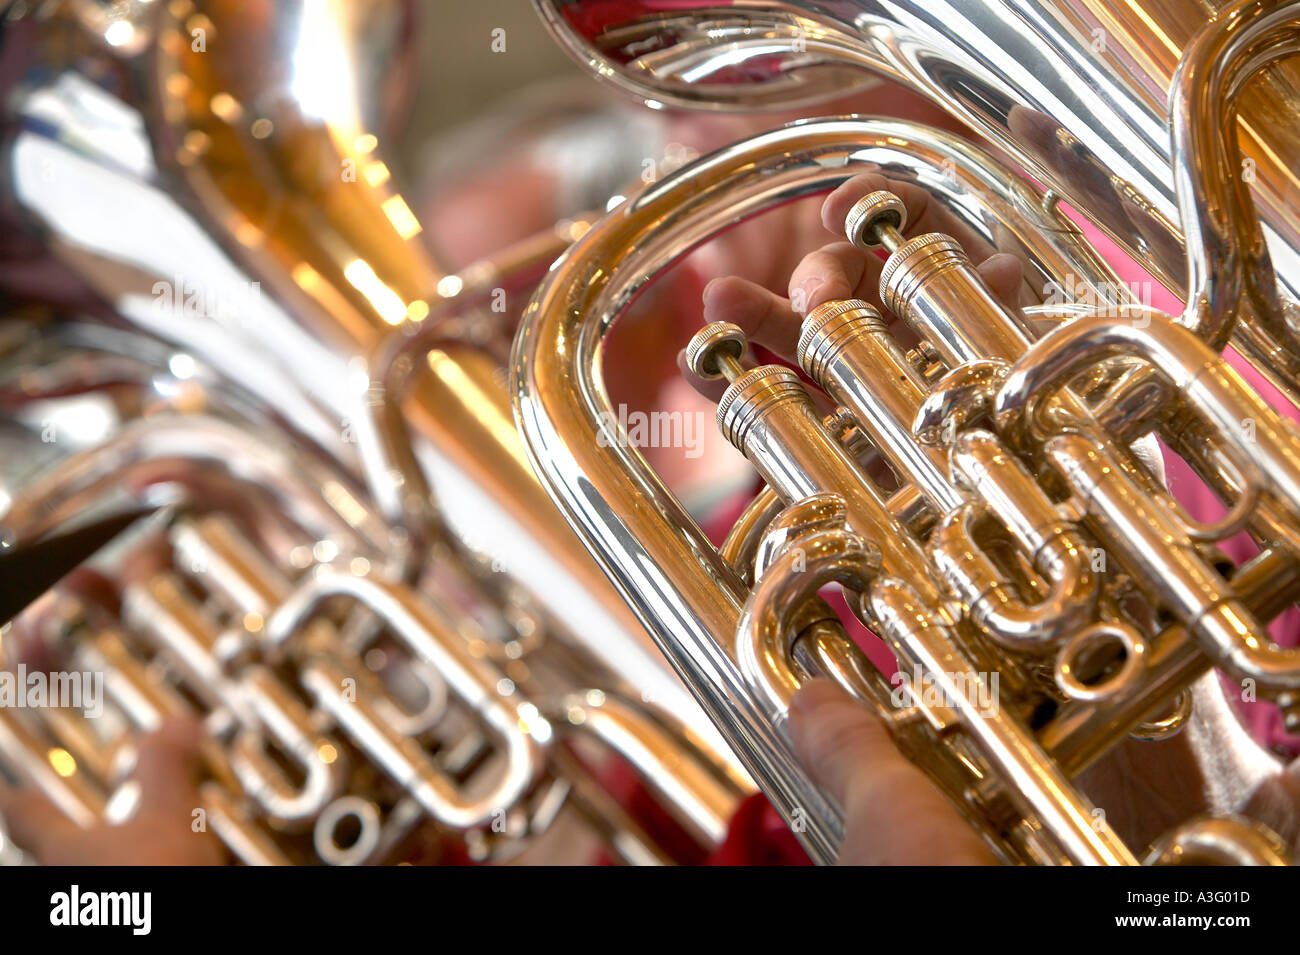 baritone horn brass instrument with fingers on 3 valves Stock Photo